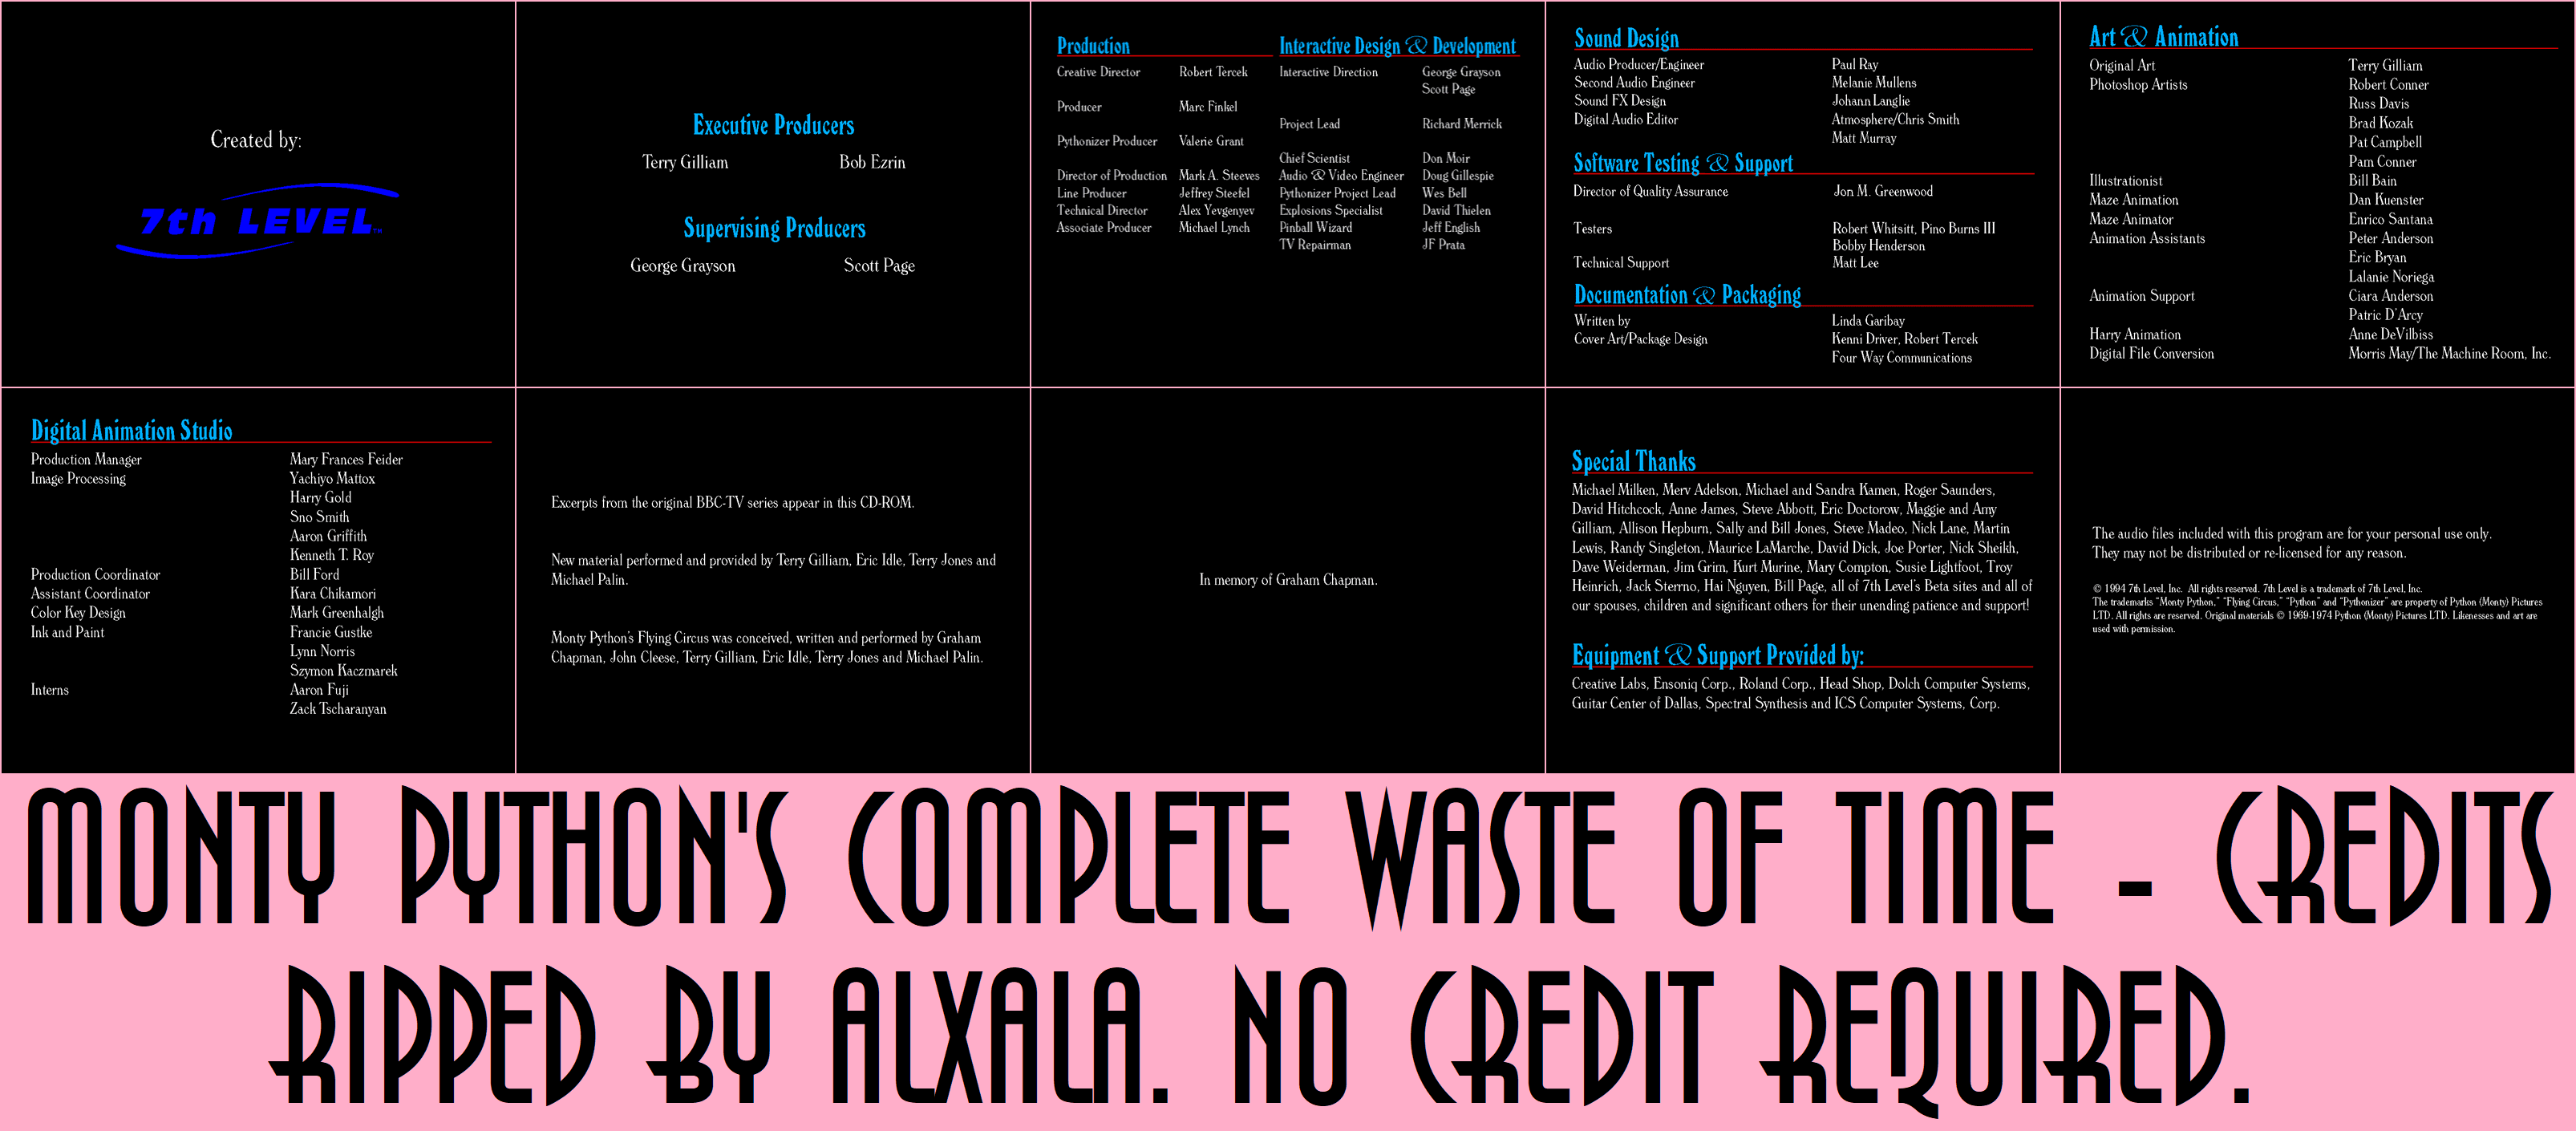 Monty Python's Complete Waste of Time - Credits